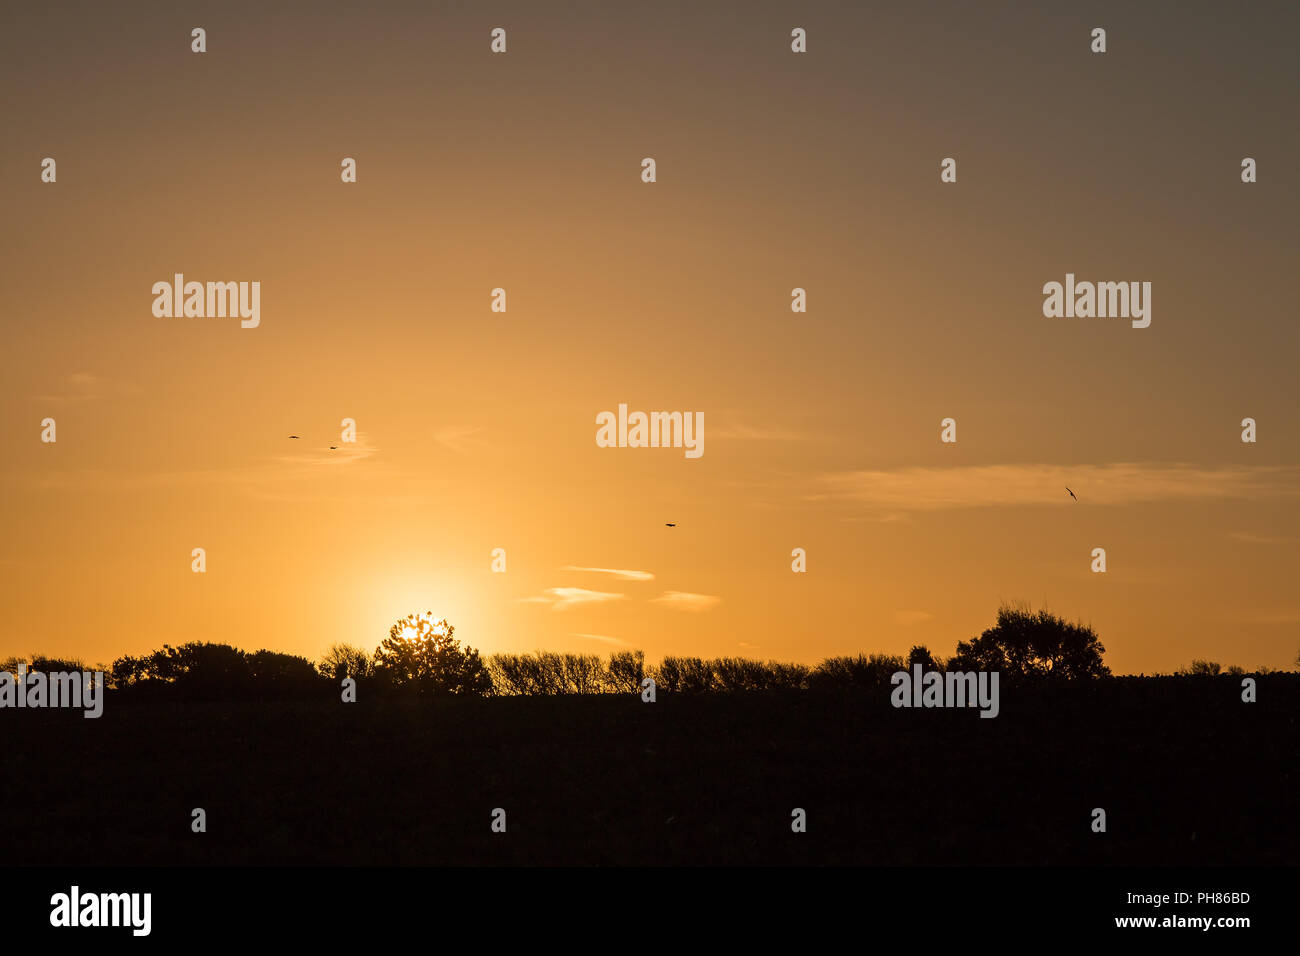 Sunset with trees silhouetted against skyline, Stock Photo